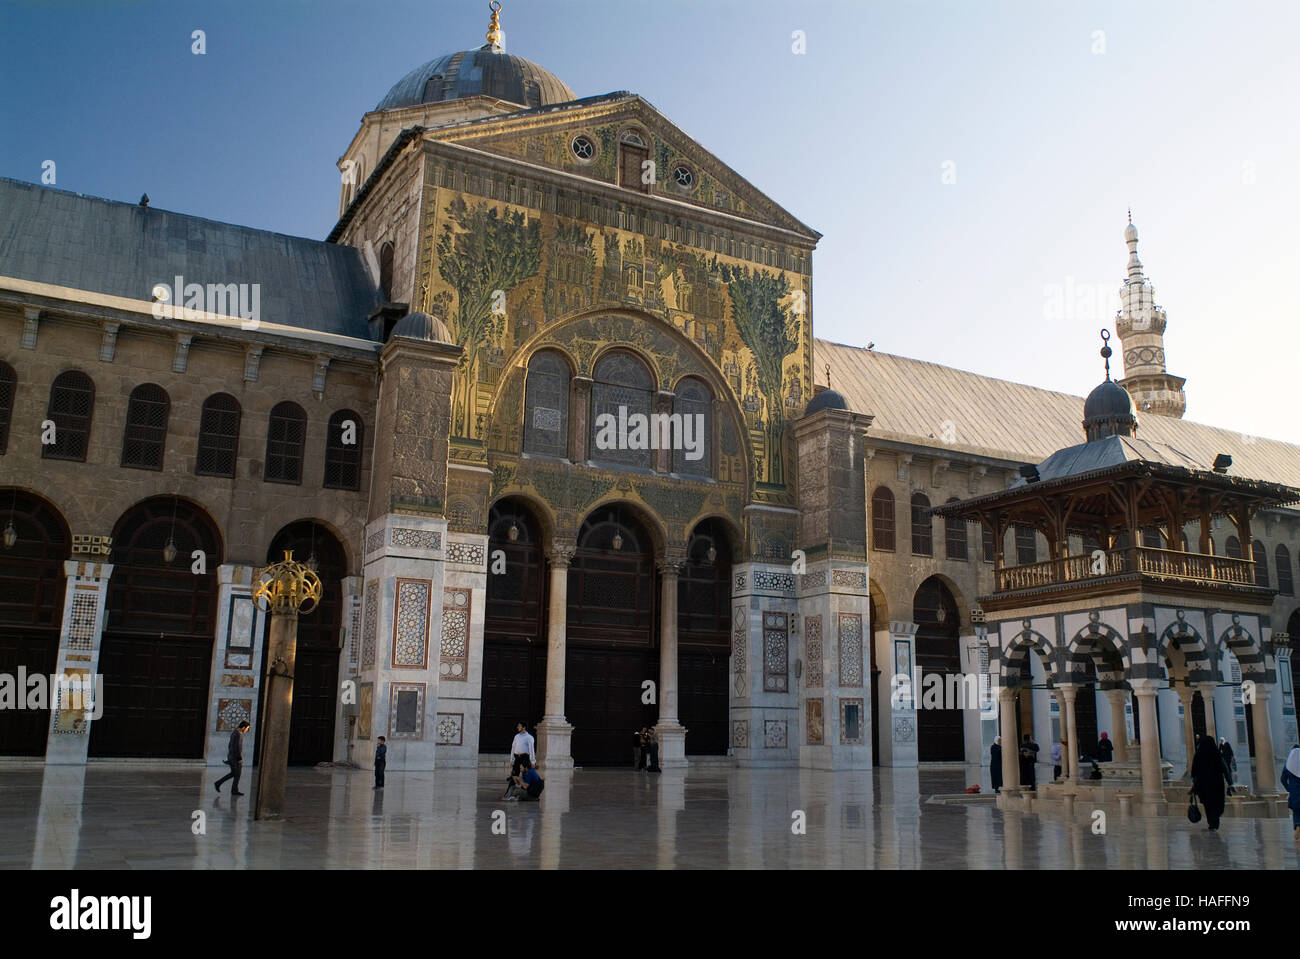 Golden mosaics on the facade of the prayer hall of the Umayyad Mosque in the Old Town of Damascus, Syria. Stock Photo